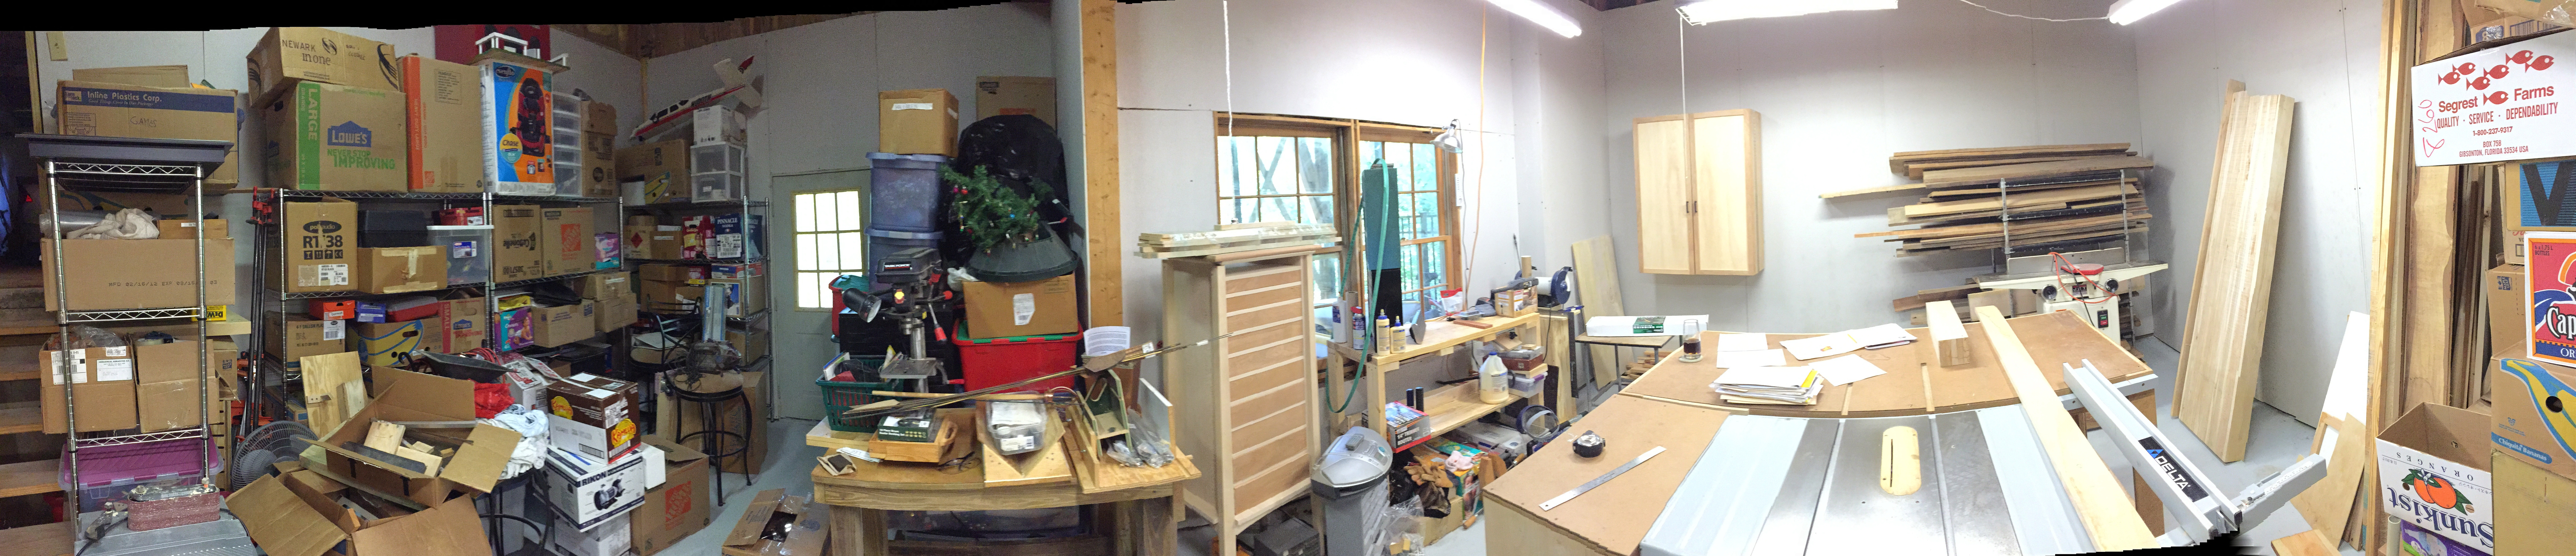 Panorama of the shop with my new iPhone 6 :-)